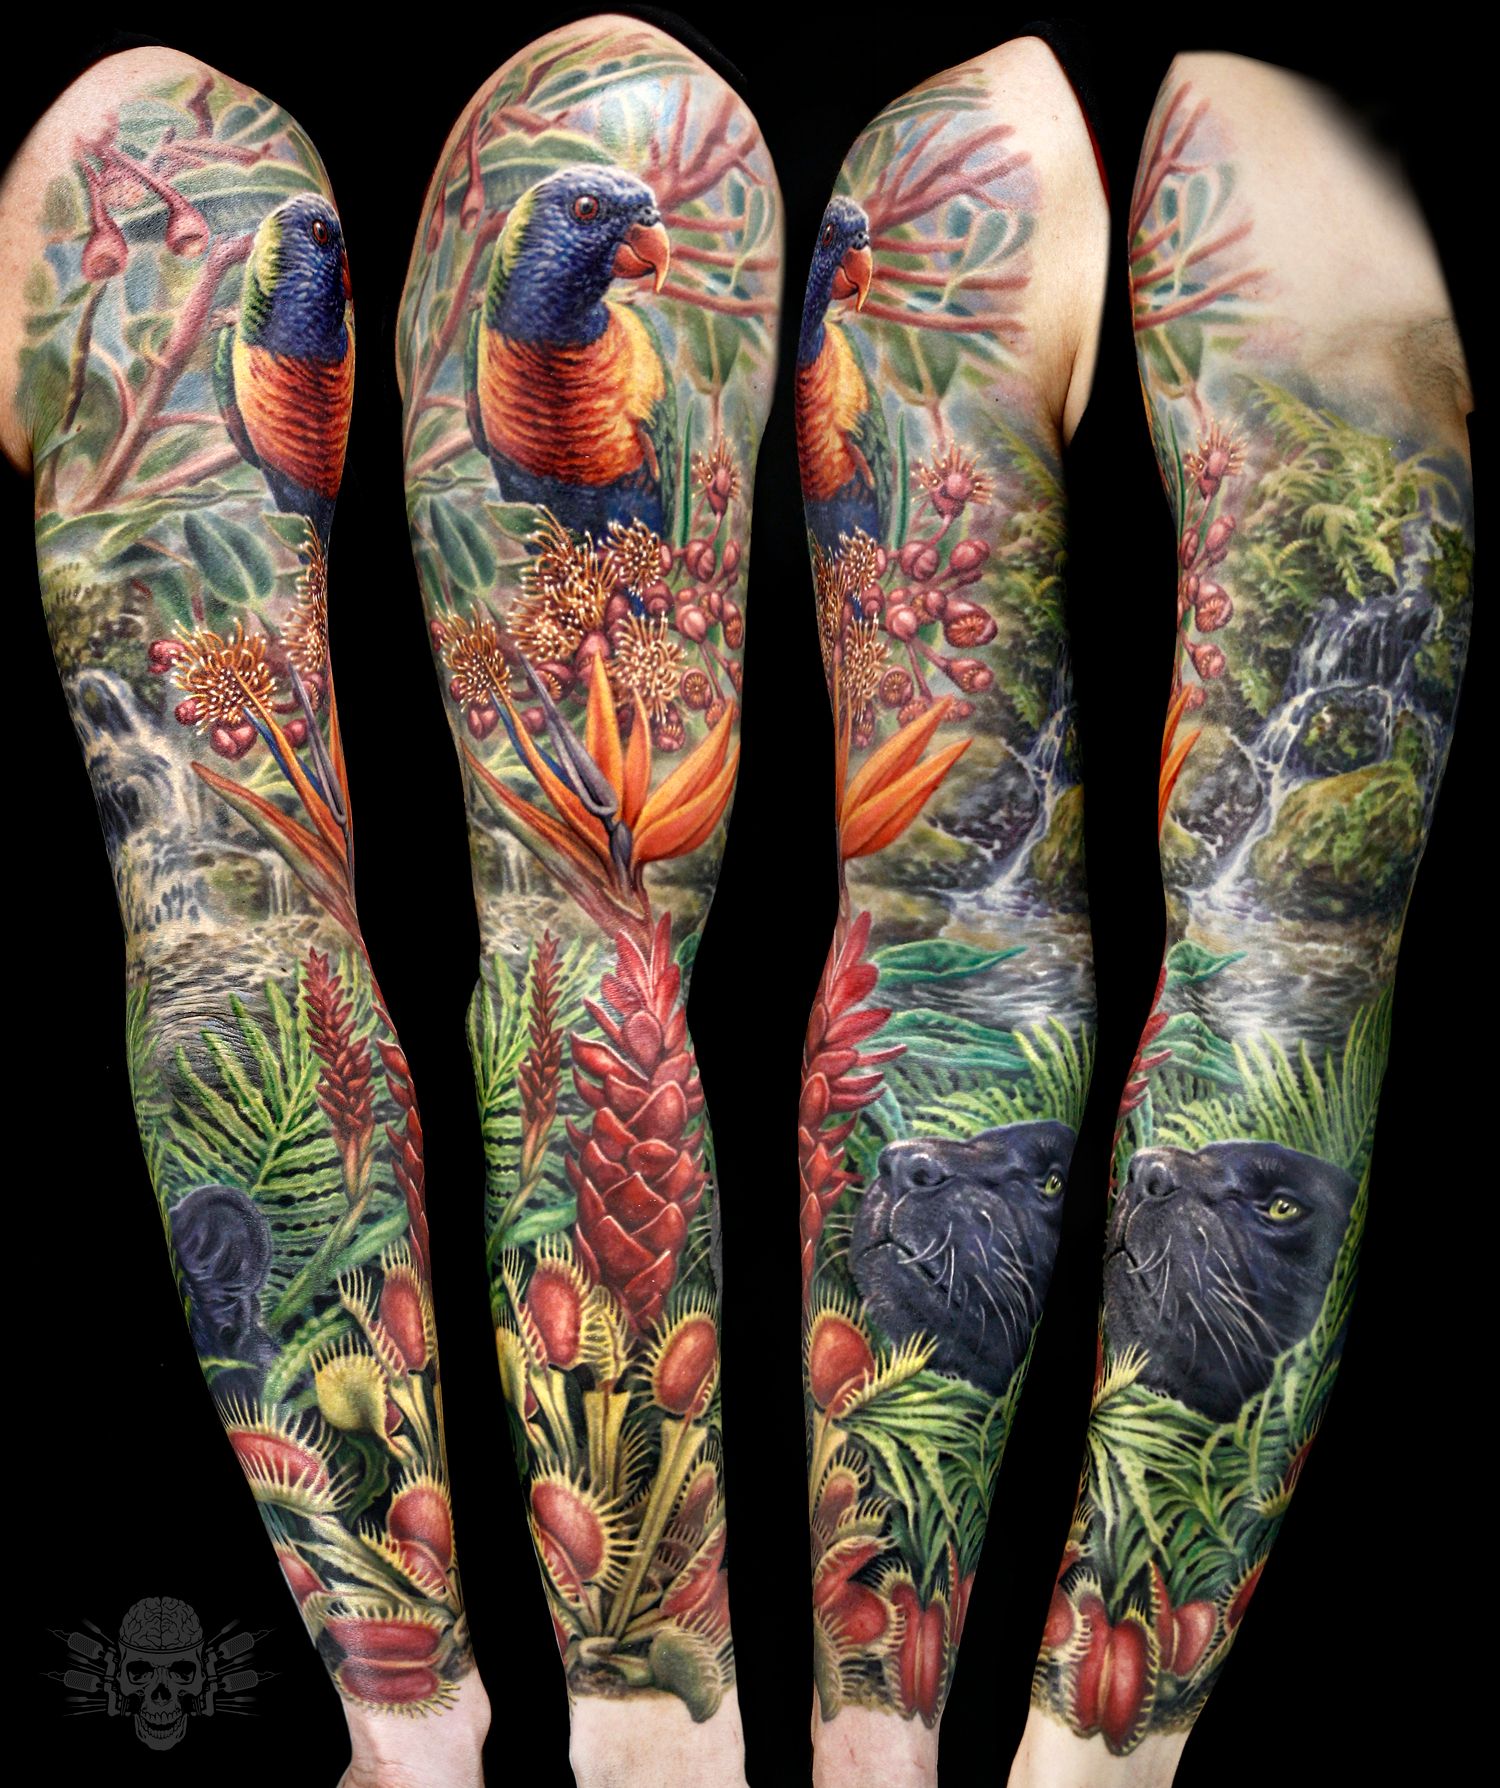 My Rainforest Sleeve Amazon Rainforest Inspiration will also be used for my  other sleeve   Animal sleeve tattoo Arm sleeve tattoos for women Best sleeve  tattoos